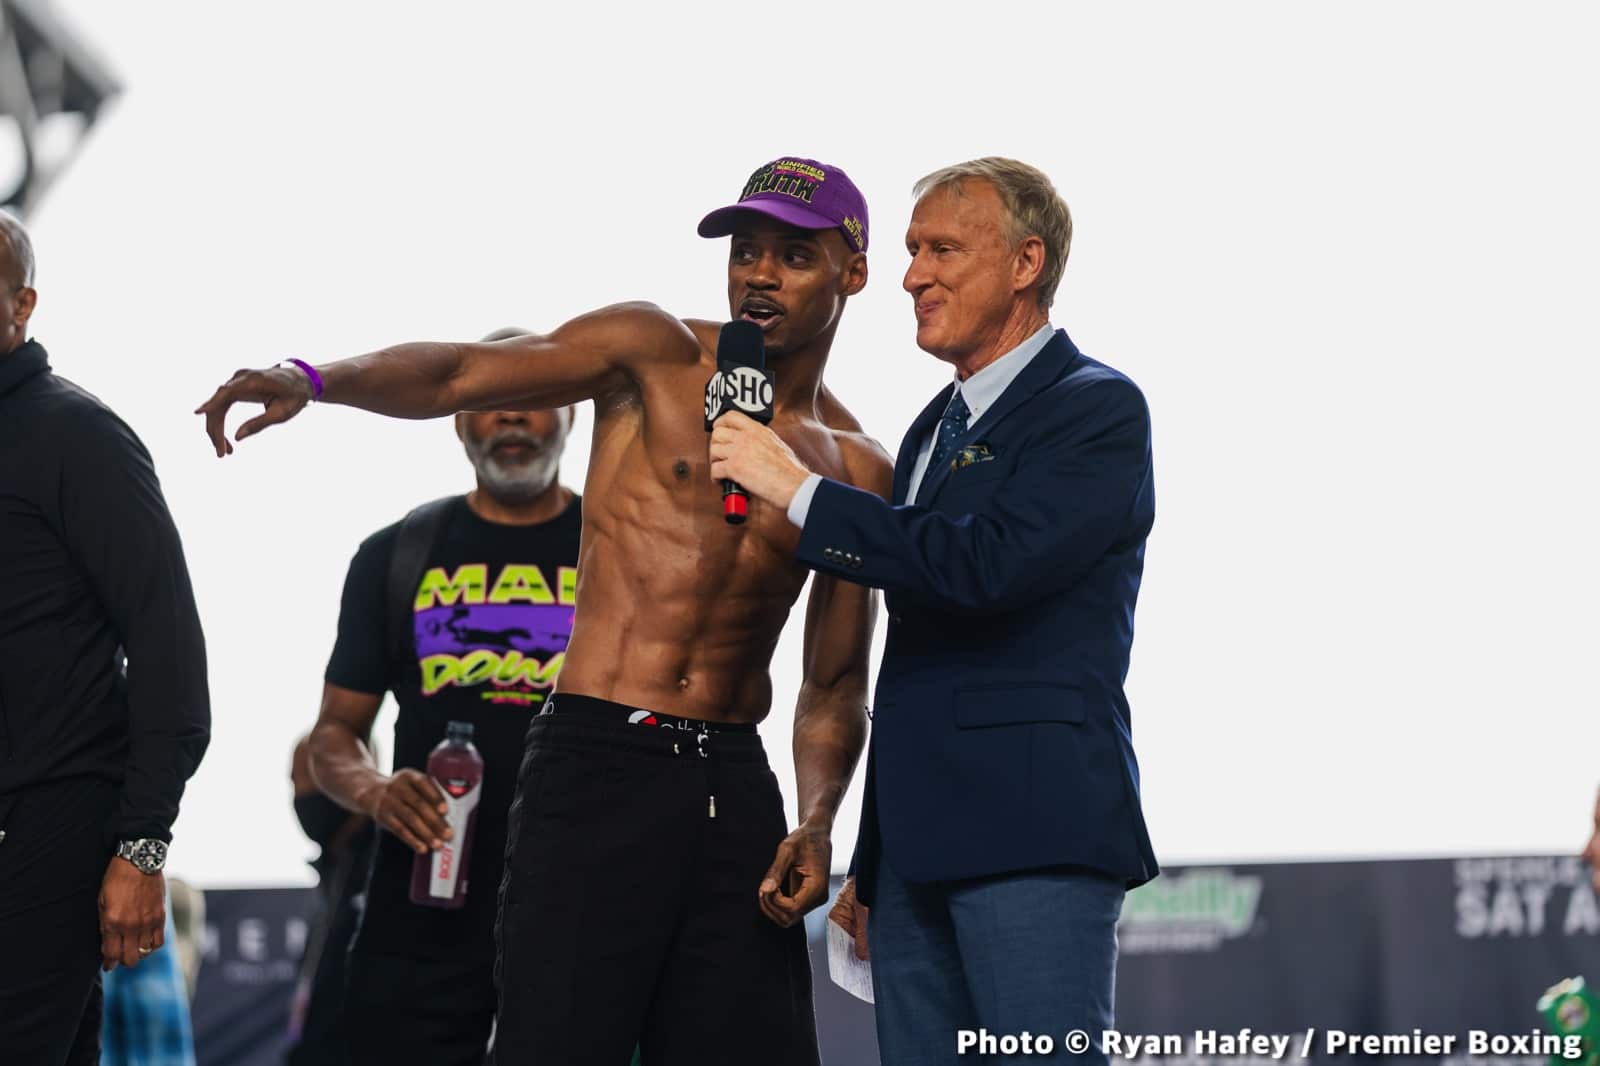 Image: Spence Jr 146.25 vs. Ugas 146.75 - weigh-in results